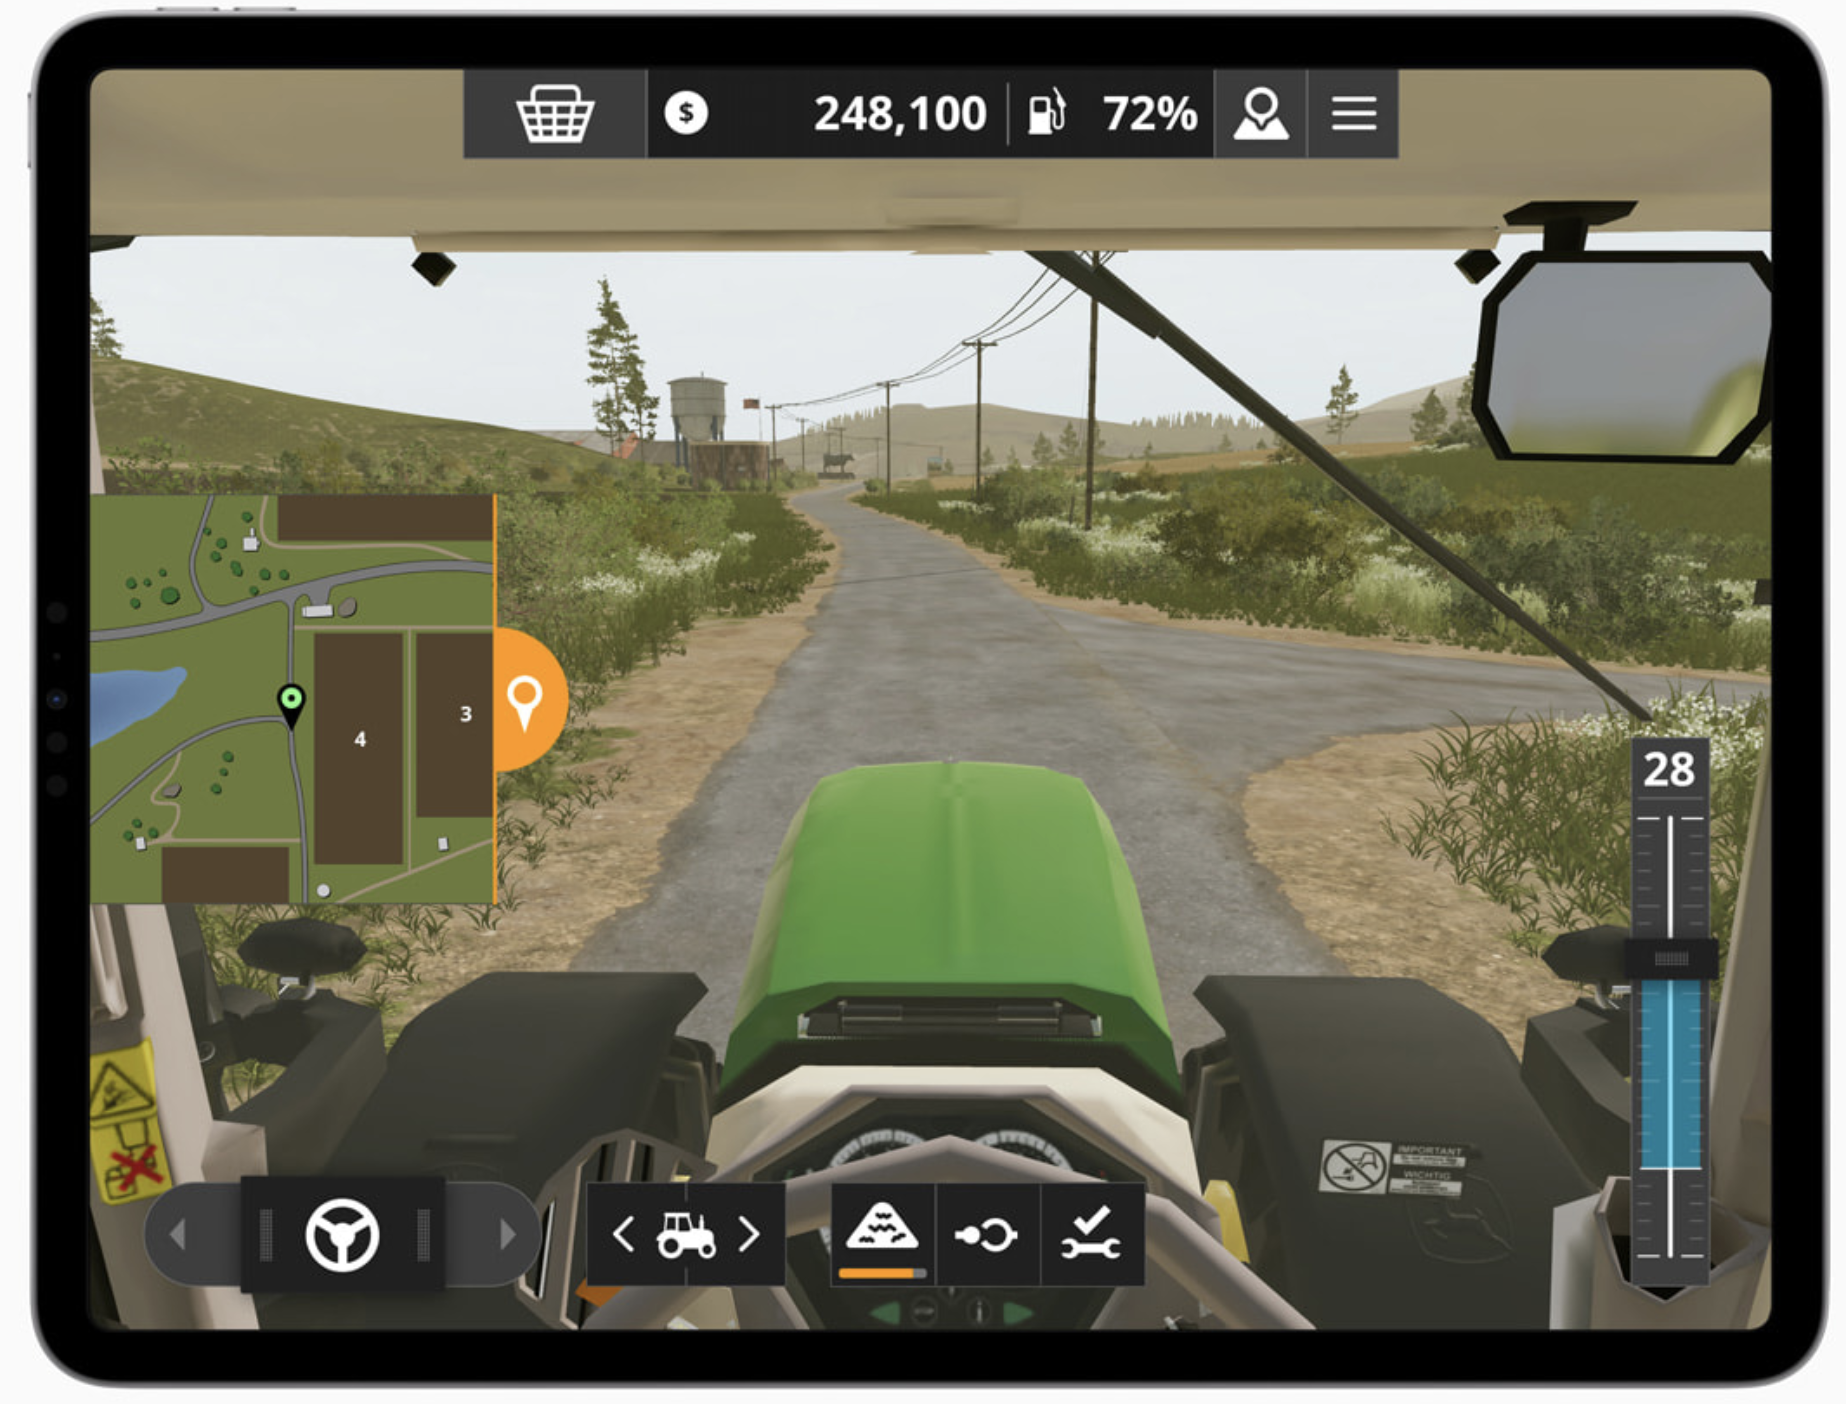 The POV from the cab of a tractor in &quot;Farming Simulator 20+&quot;